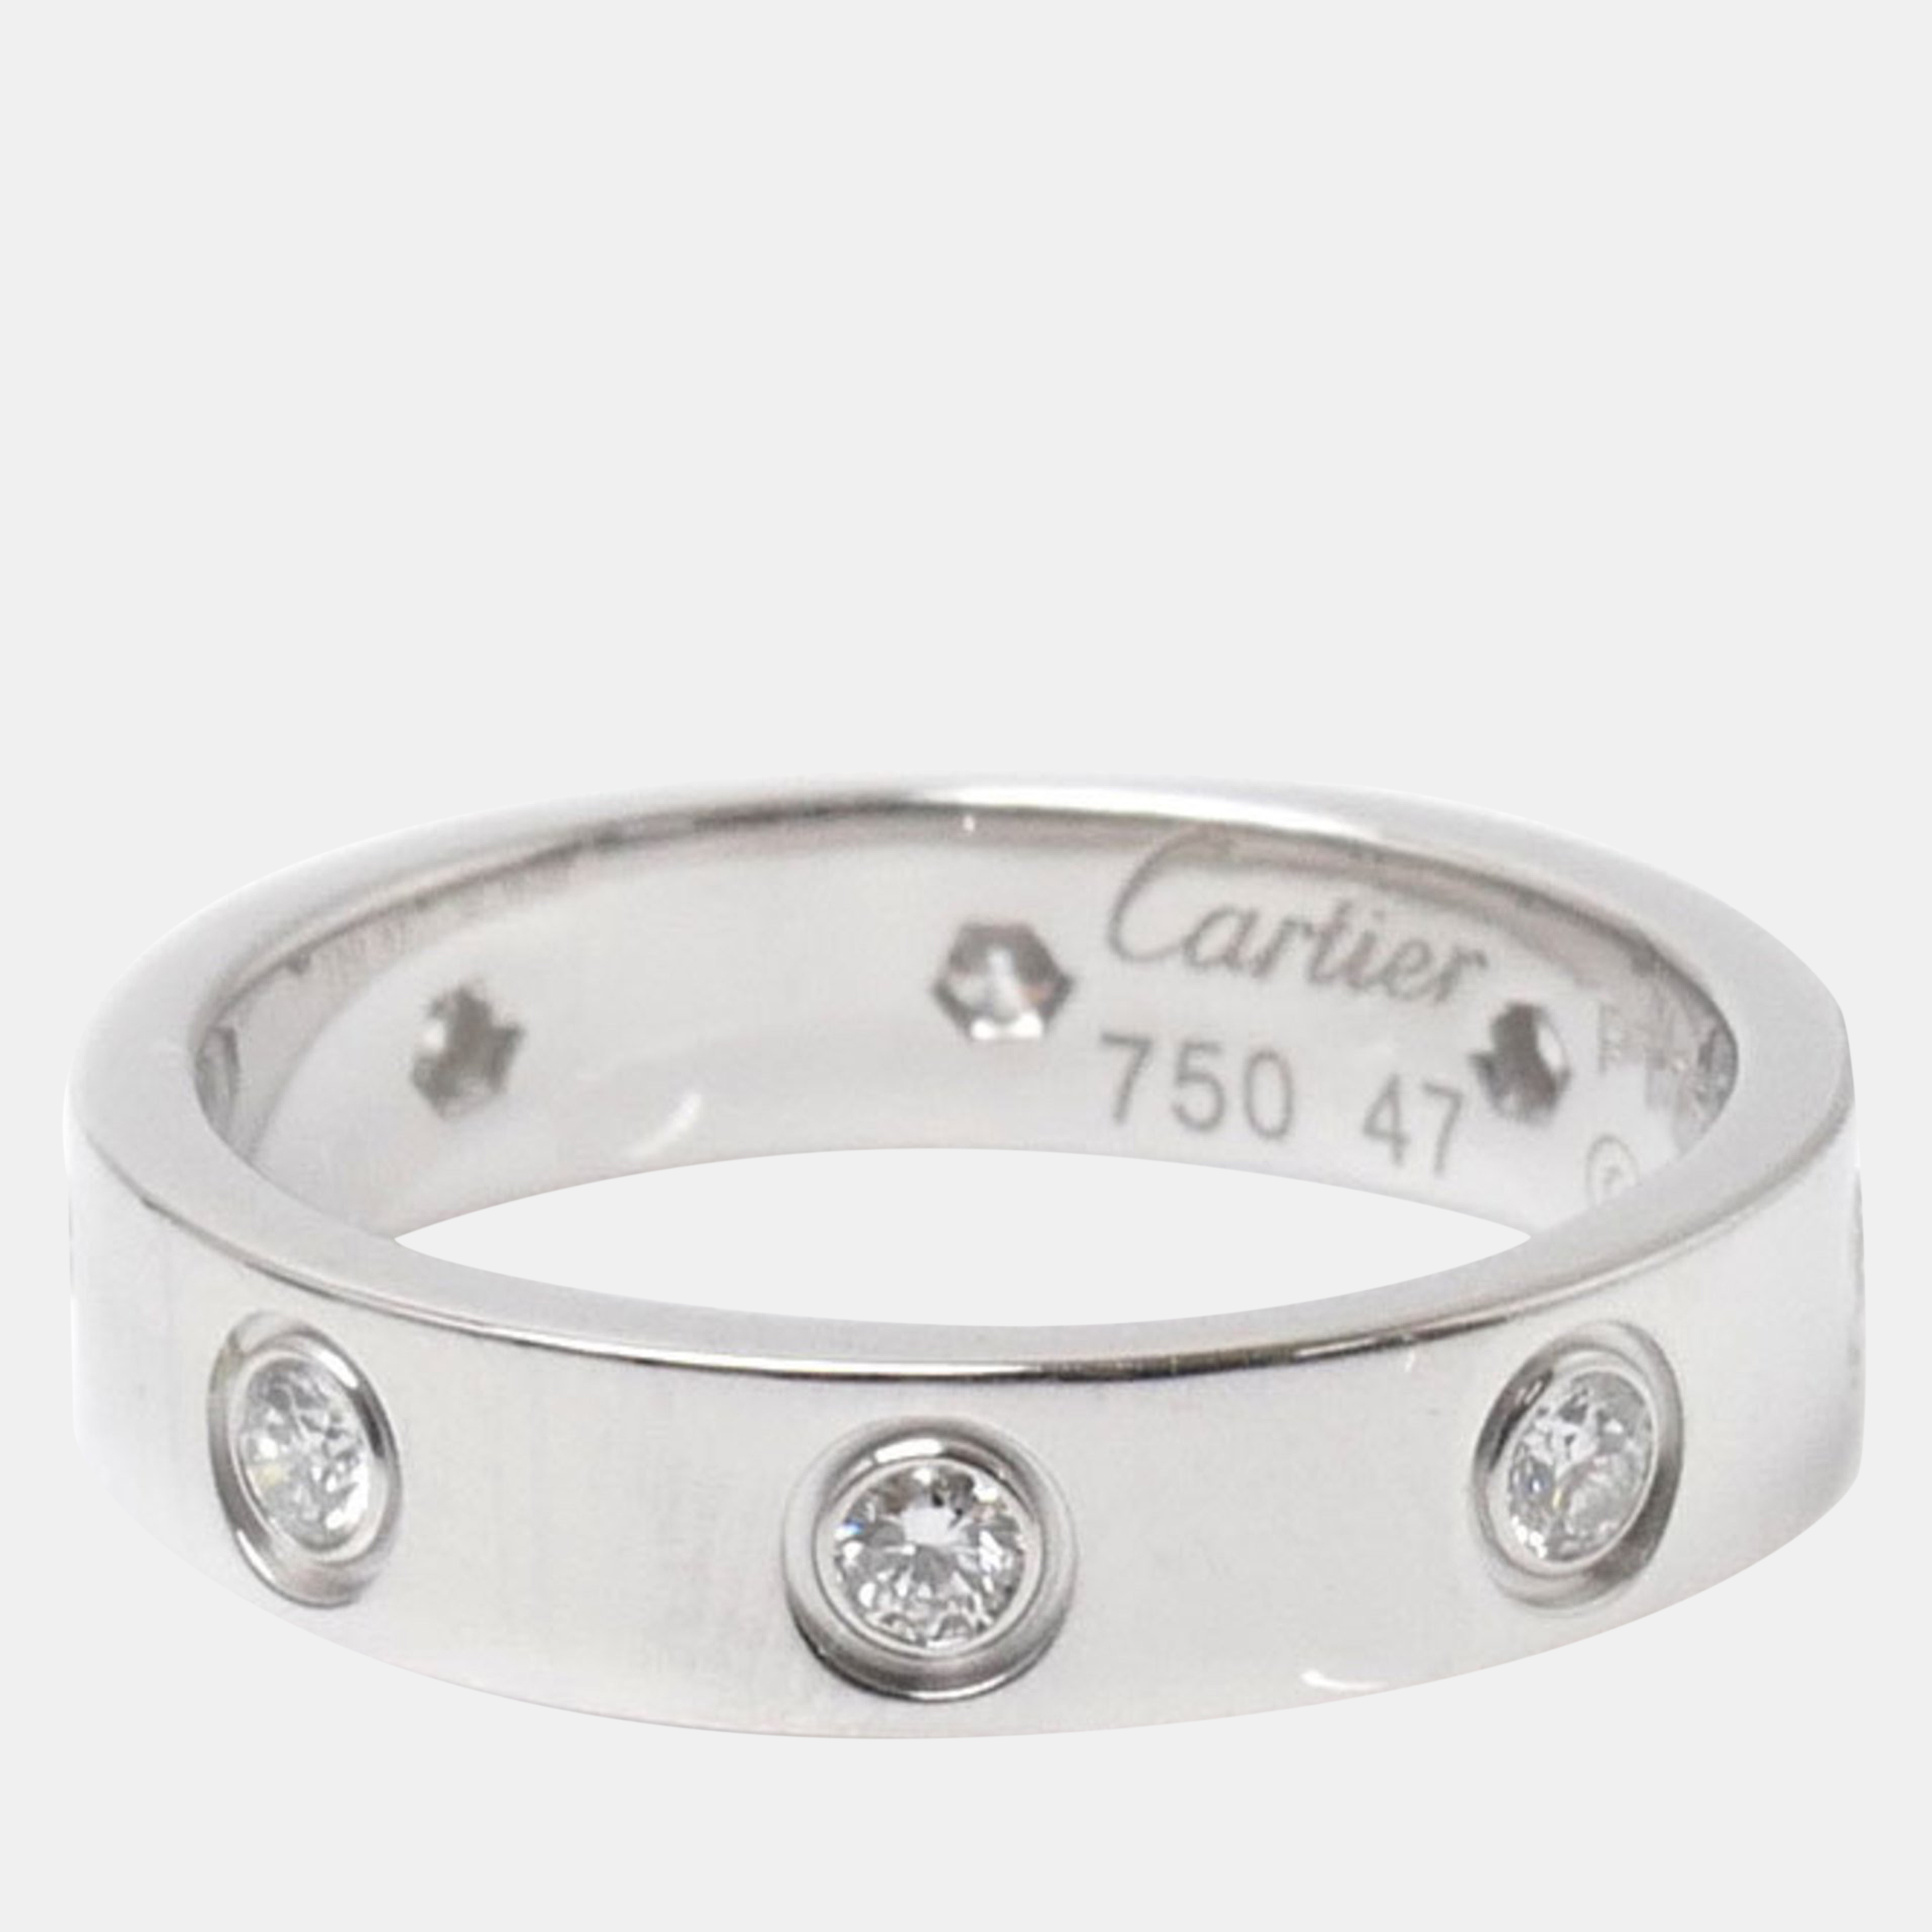 Cartier 18K White Gold And Diamond Love Band Ring EU 47